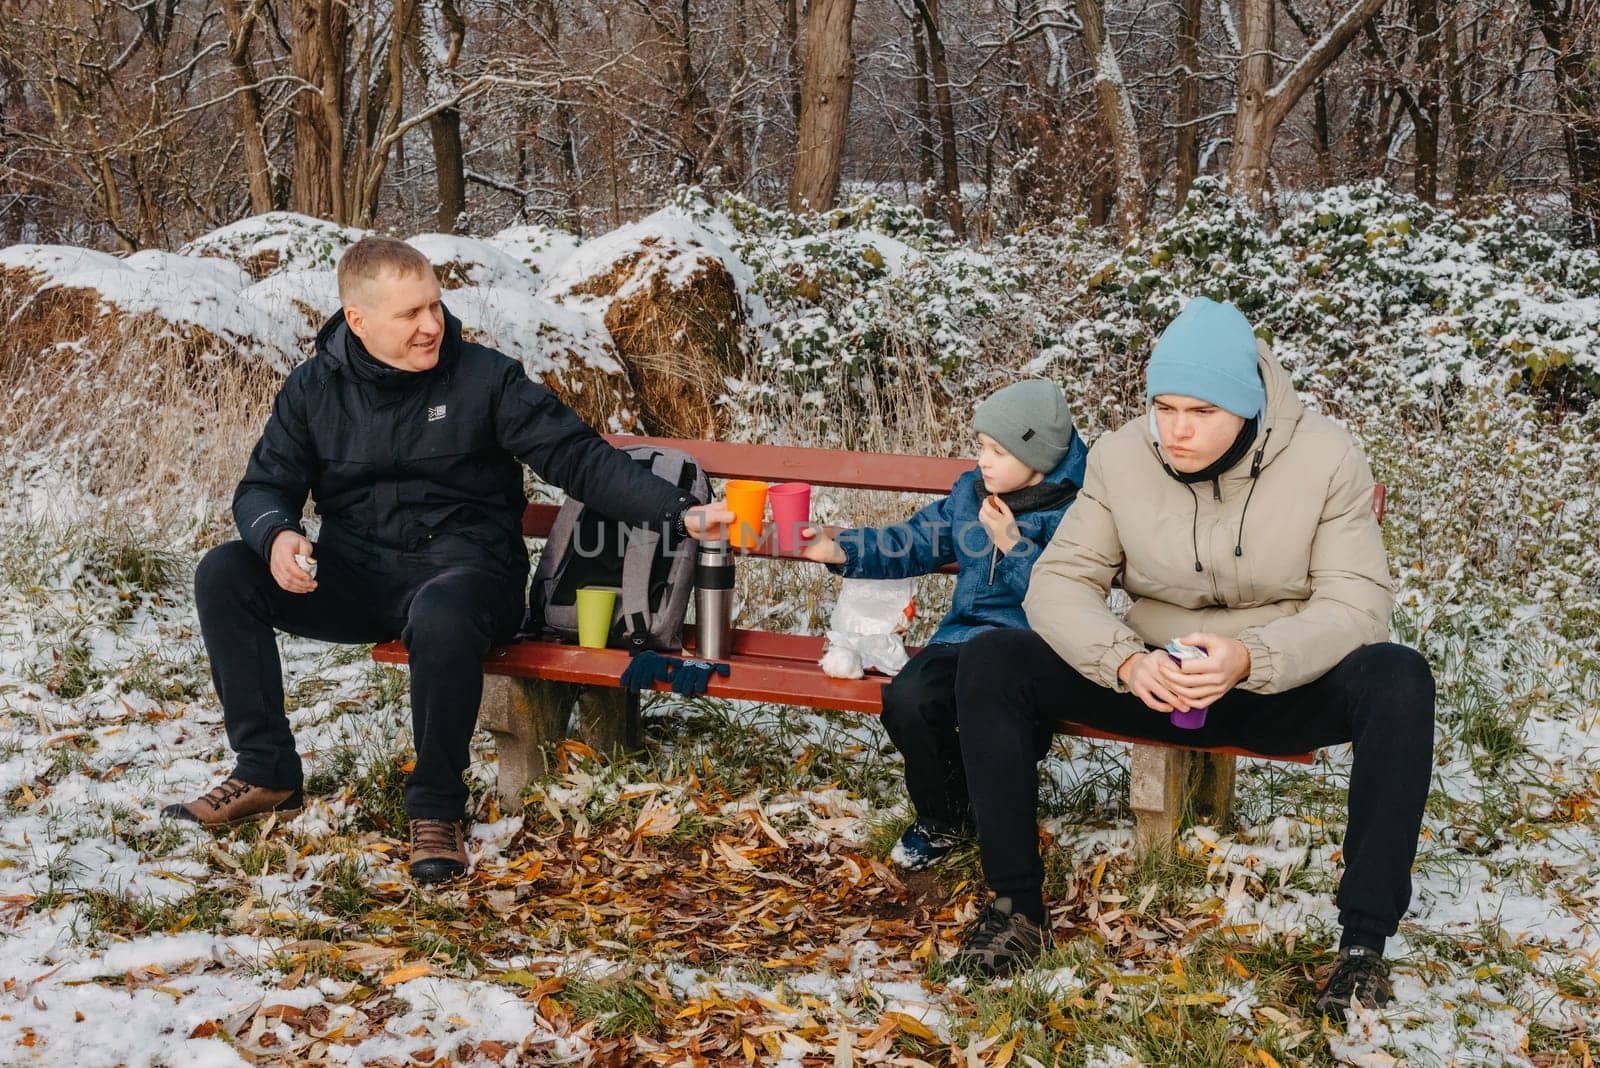 Snowy Park Serenity: Dad and Sons Share Treats and Smiles in a Winter Wonderland. Winter's Togetherness: A Delightful Bench Picnic with Dad and the Boys. A Heartwarming Winter Picnic with Father and Sons in a Snow-Kissed Park by Andrii_Ko